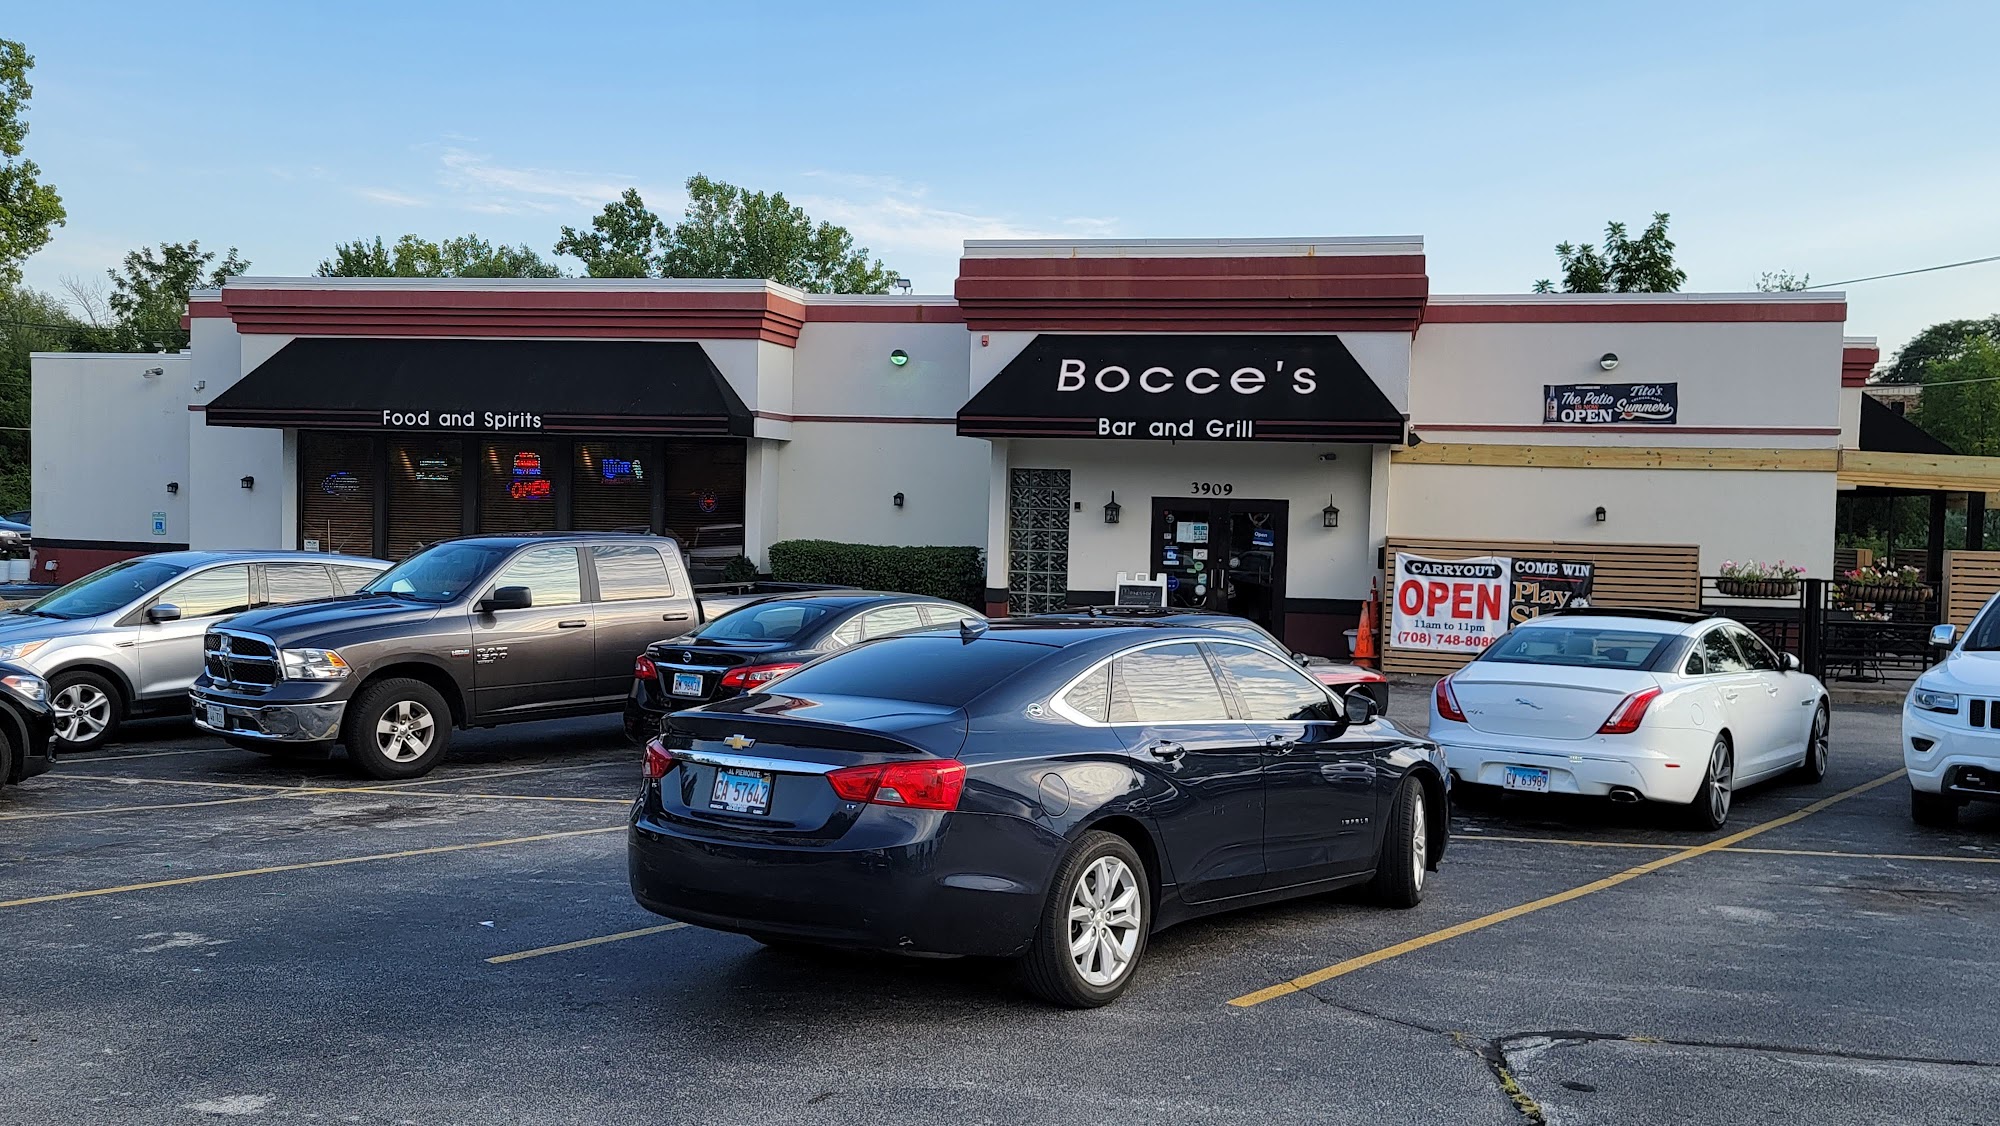 Bocce's Bar and Grill